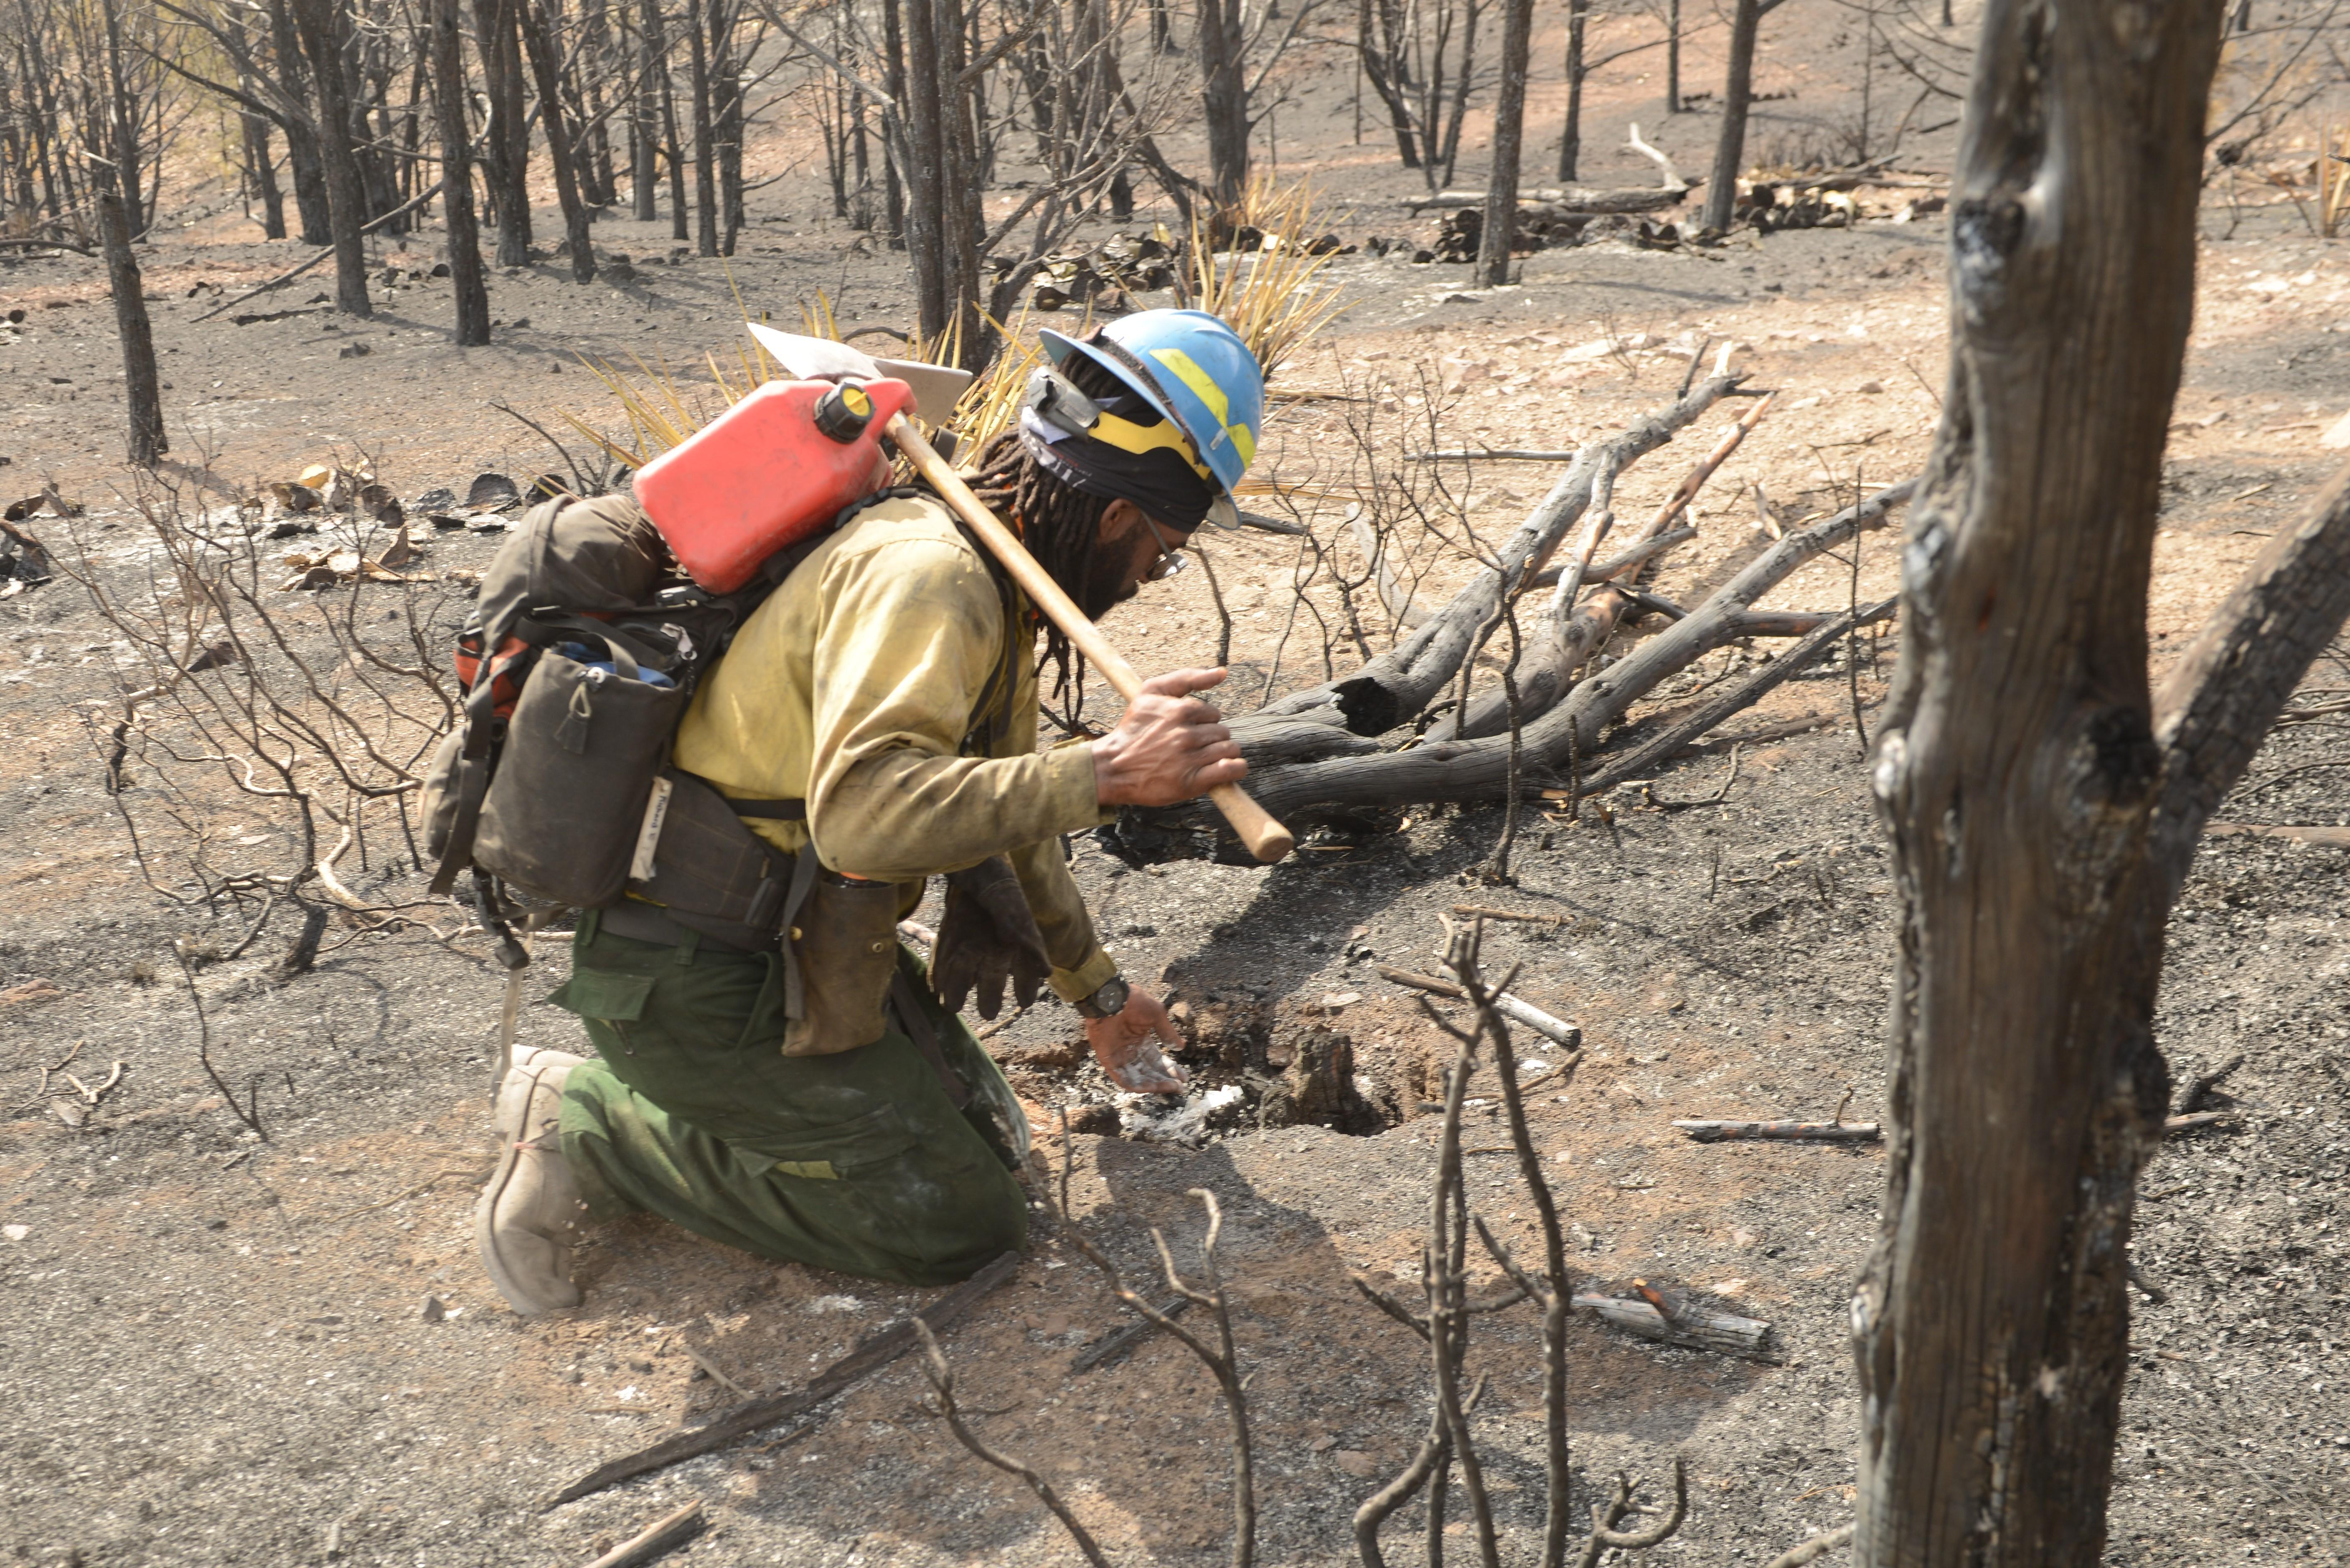 Wildland firefighters perform mop up and cold trailing. Cold trailing involves carefully inspecting and feeling with bare hands to detect any fire, digging out and extinguishing every hot spot, and even building new fireline around any live edges.